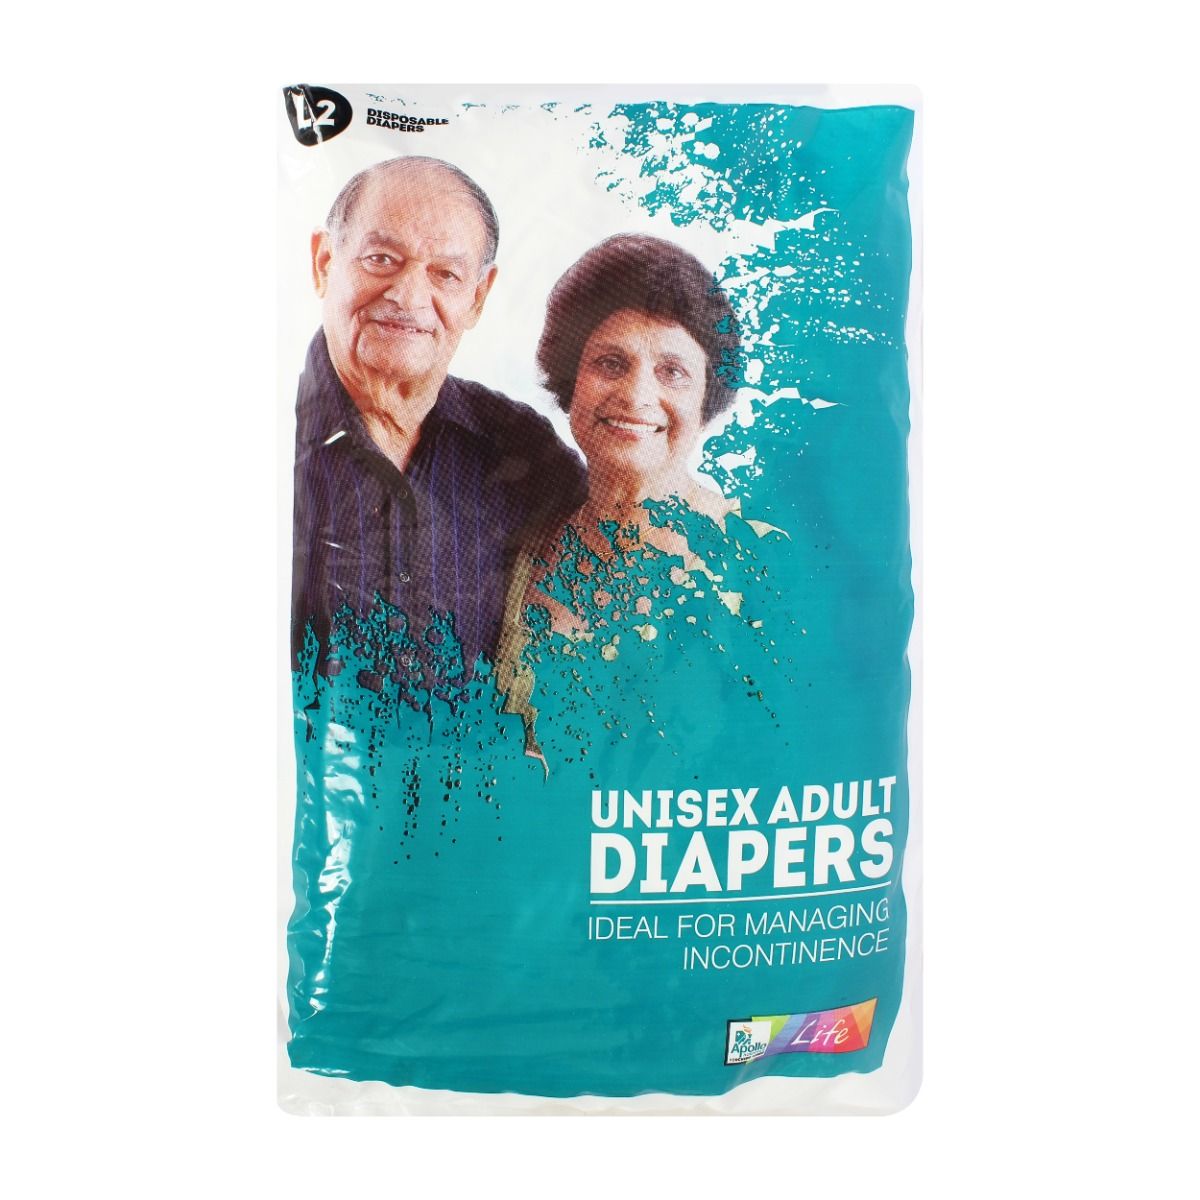 Apollo Life Unisex Adult Diapers Large, 2 Count, Pack of 1 